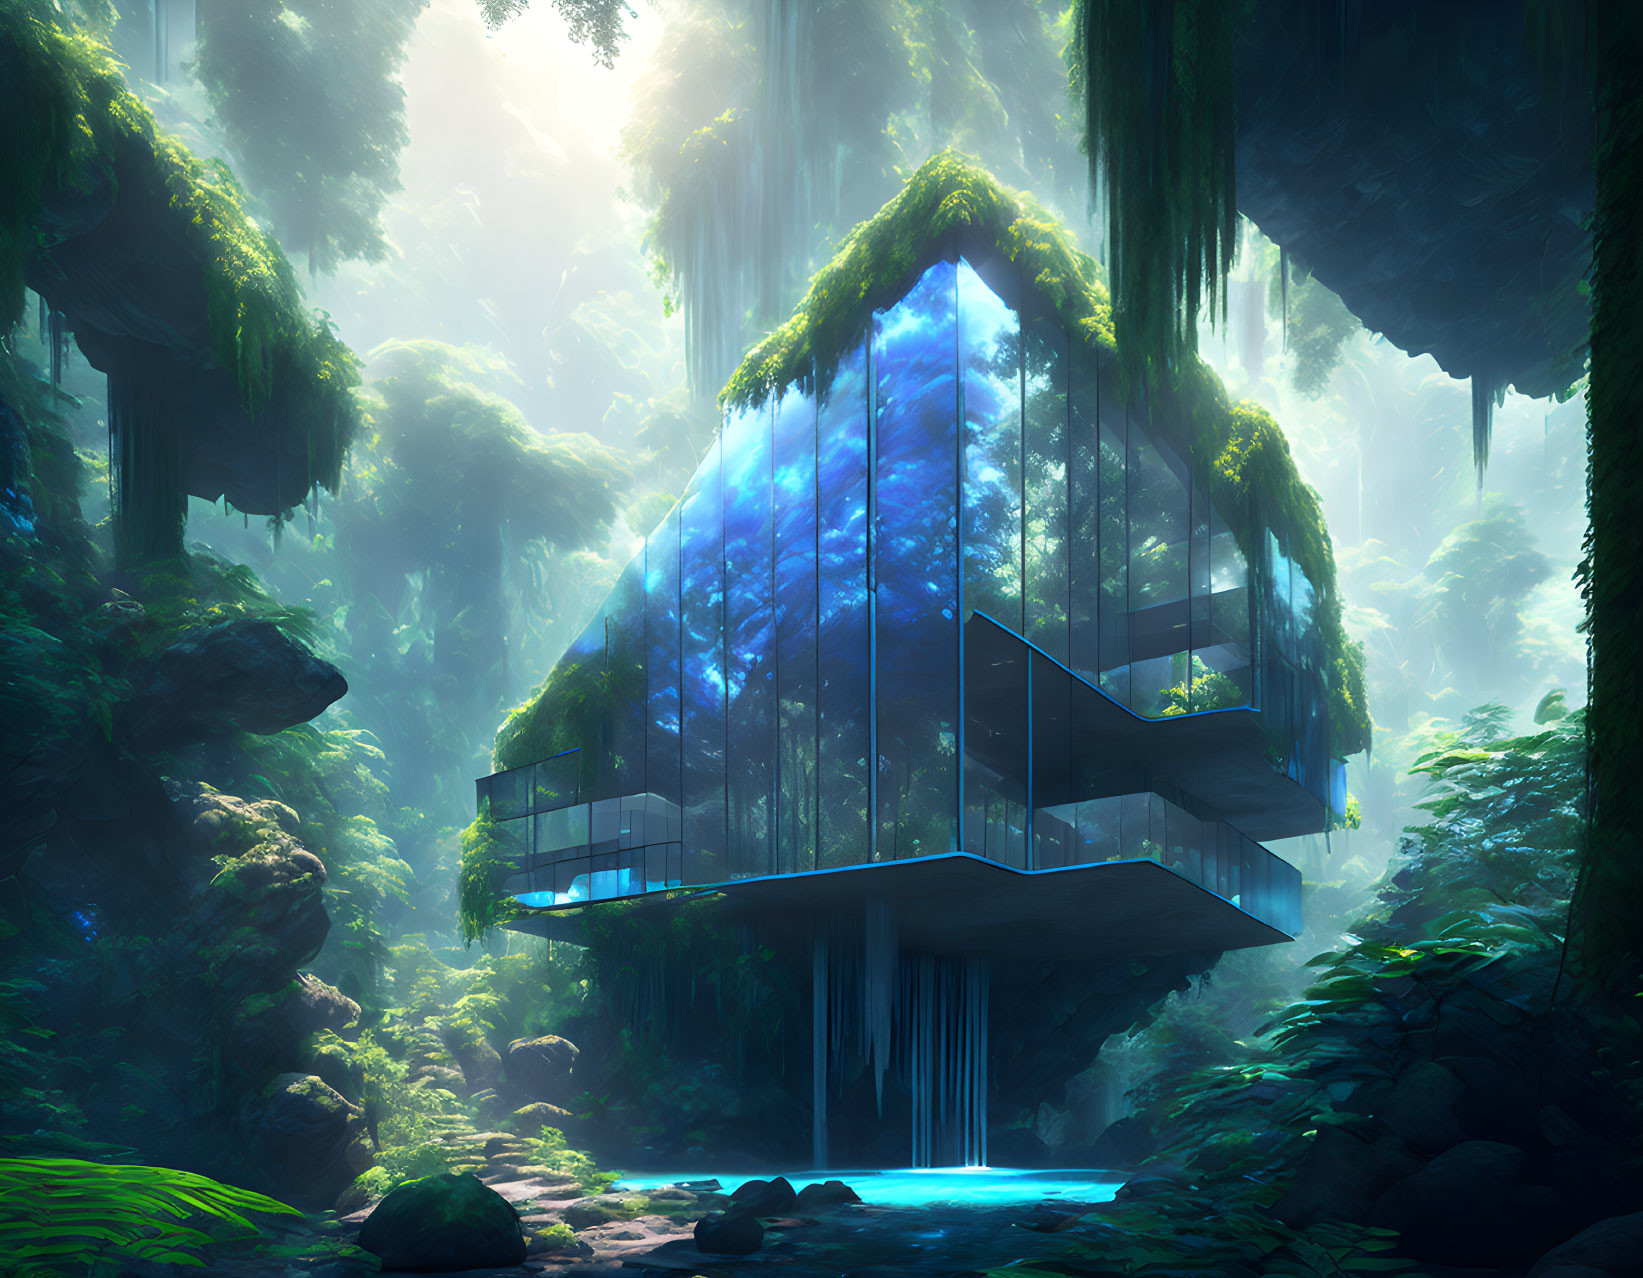 Futuristic glass house in lush forest with waterfalls and blue pond